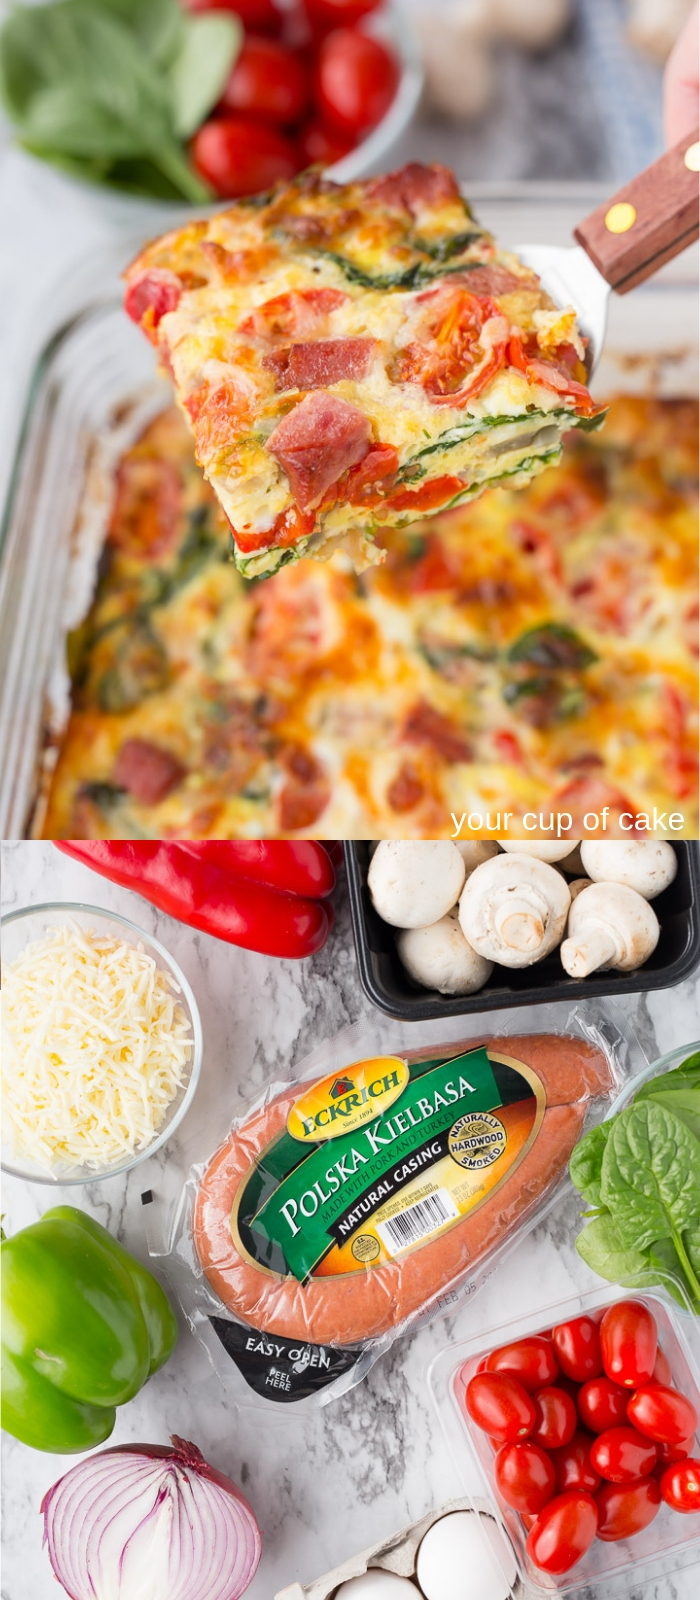 Easy Sausage Breakfast Casserole Your Cup Of Cake,Hot Buttered Rum Too Faced